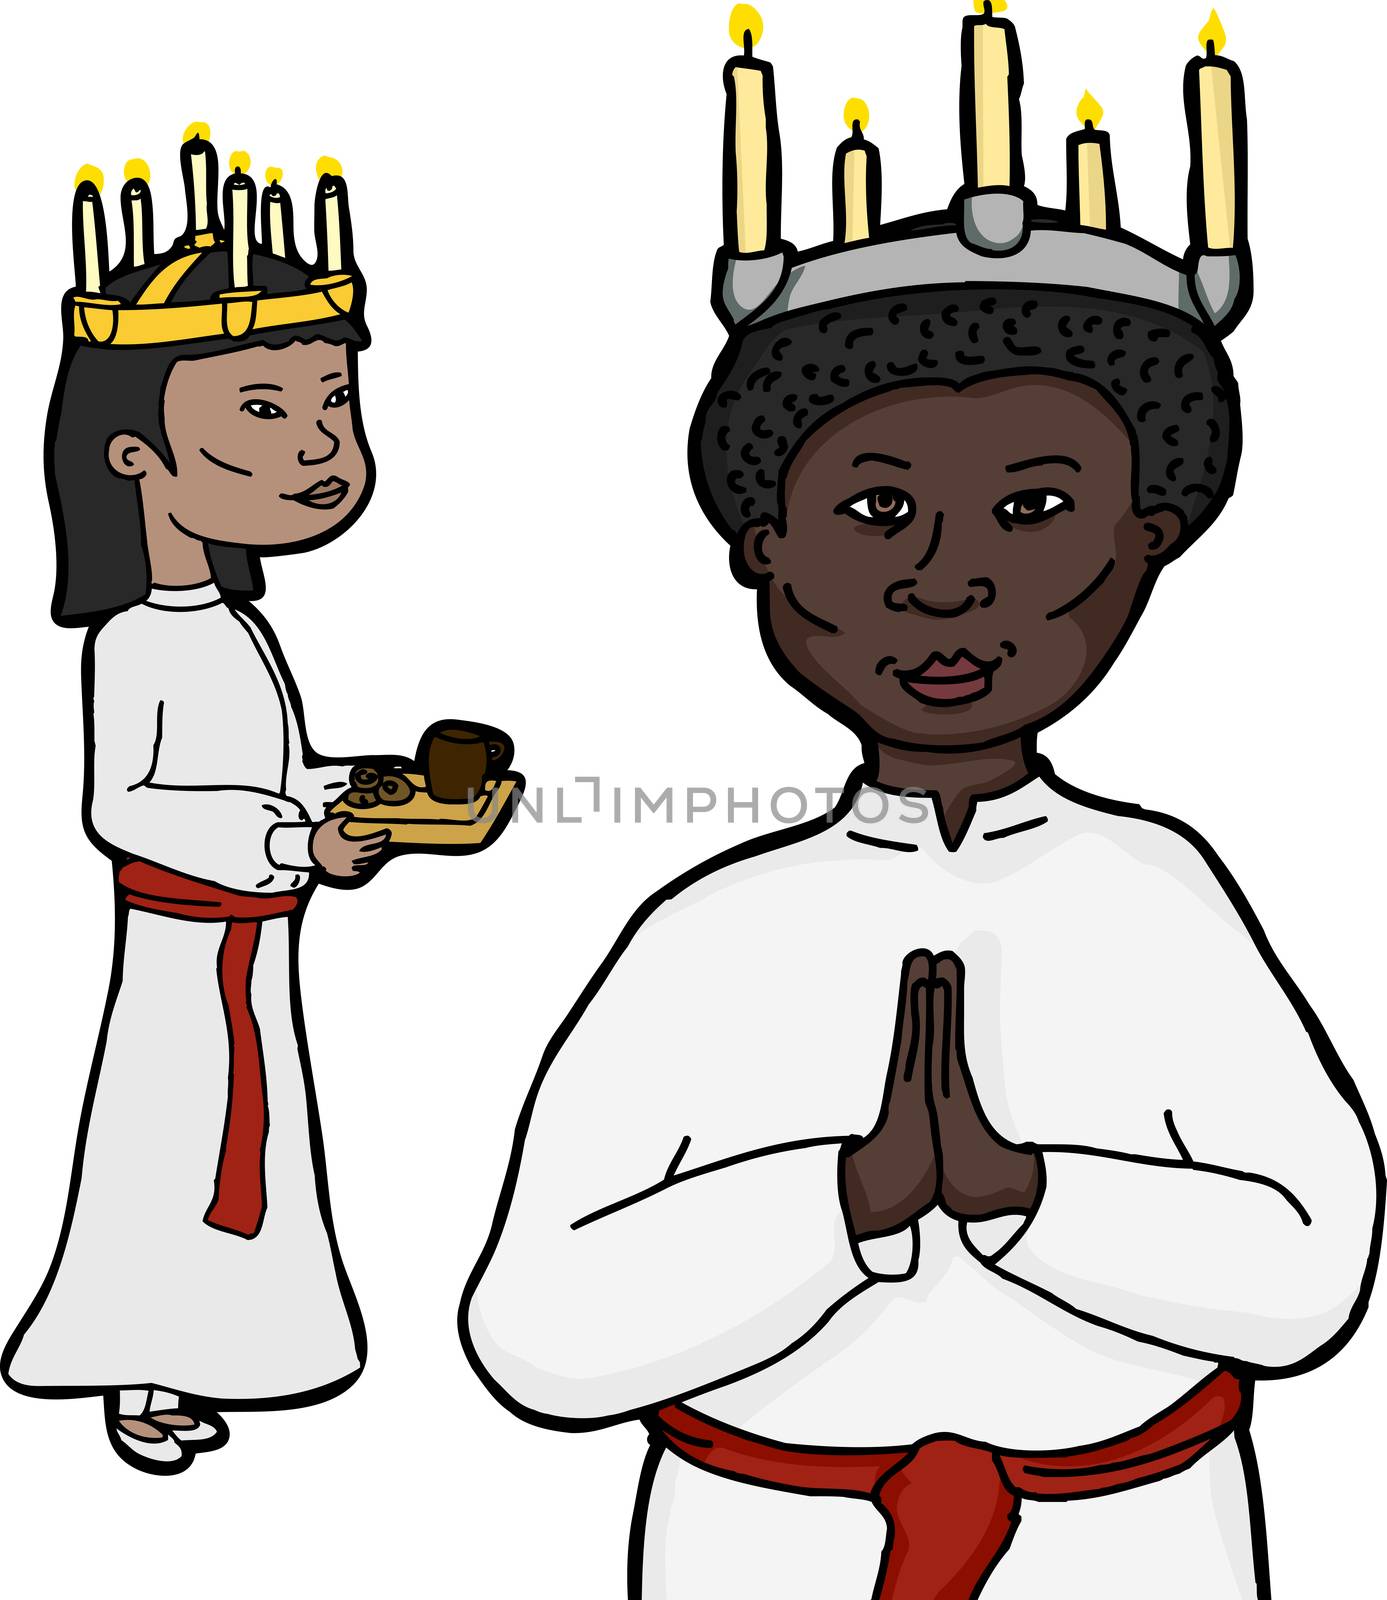 Asian and African women in costume for Swedish holiday Sankta Lucia